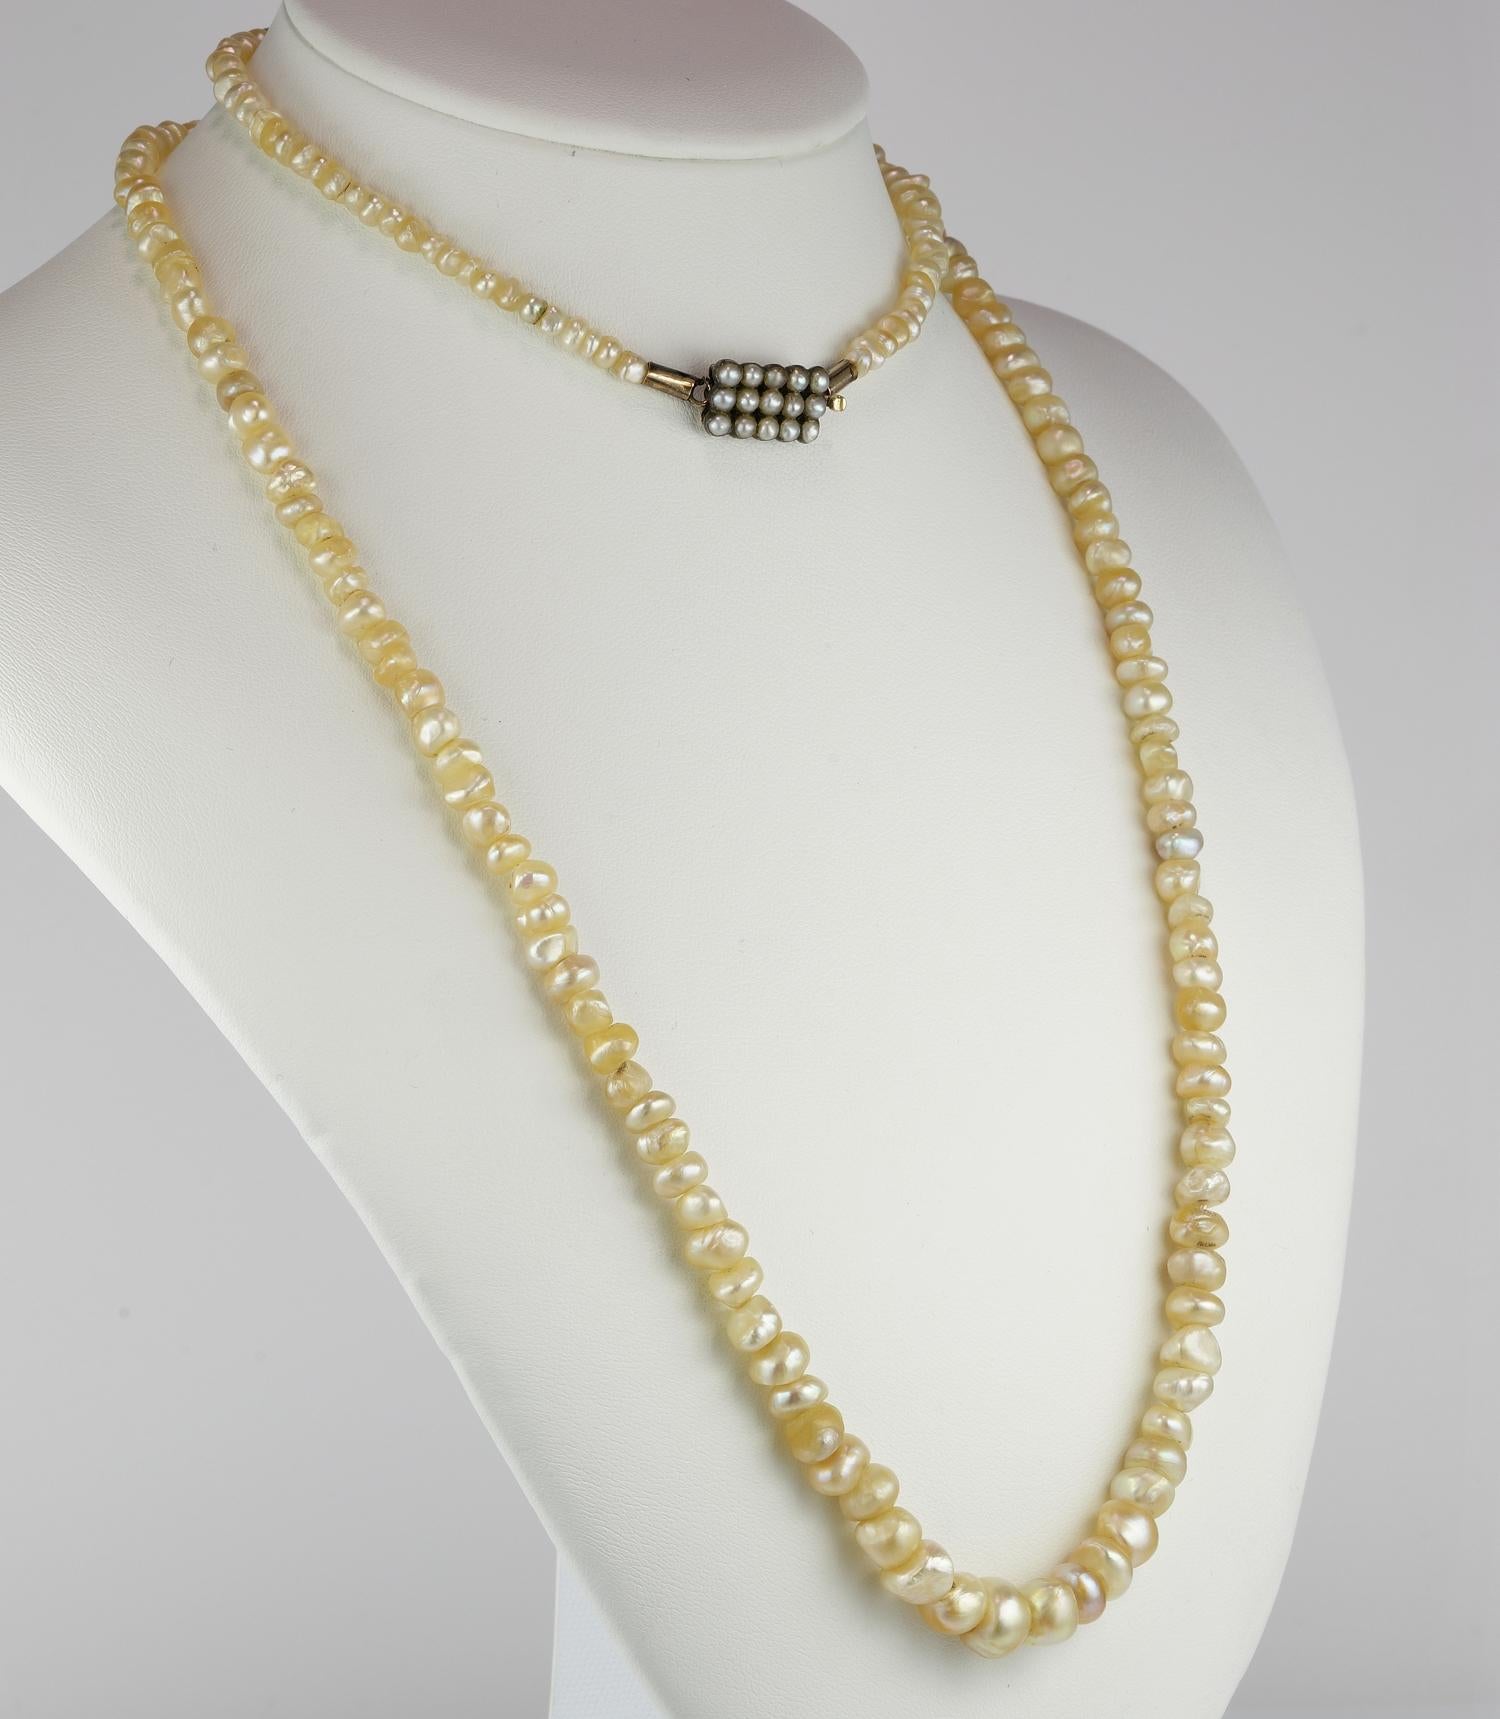 Rare find!

Magnificent Georgian Period - 1800 ca – long flapper necklace made of Natural Basra Pearls from the Persian Gulf 
Rarest for age and for Pearls origin being 100% Natural not treated or worked, prizing exceptional measure from 4 mm. to 9